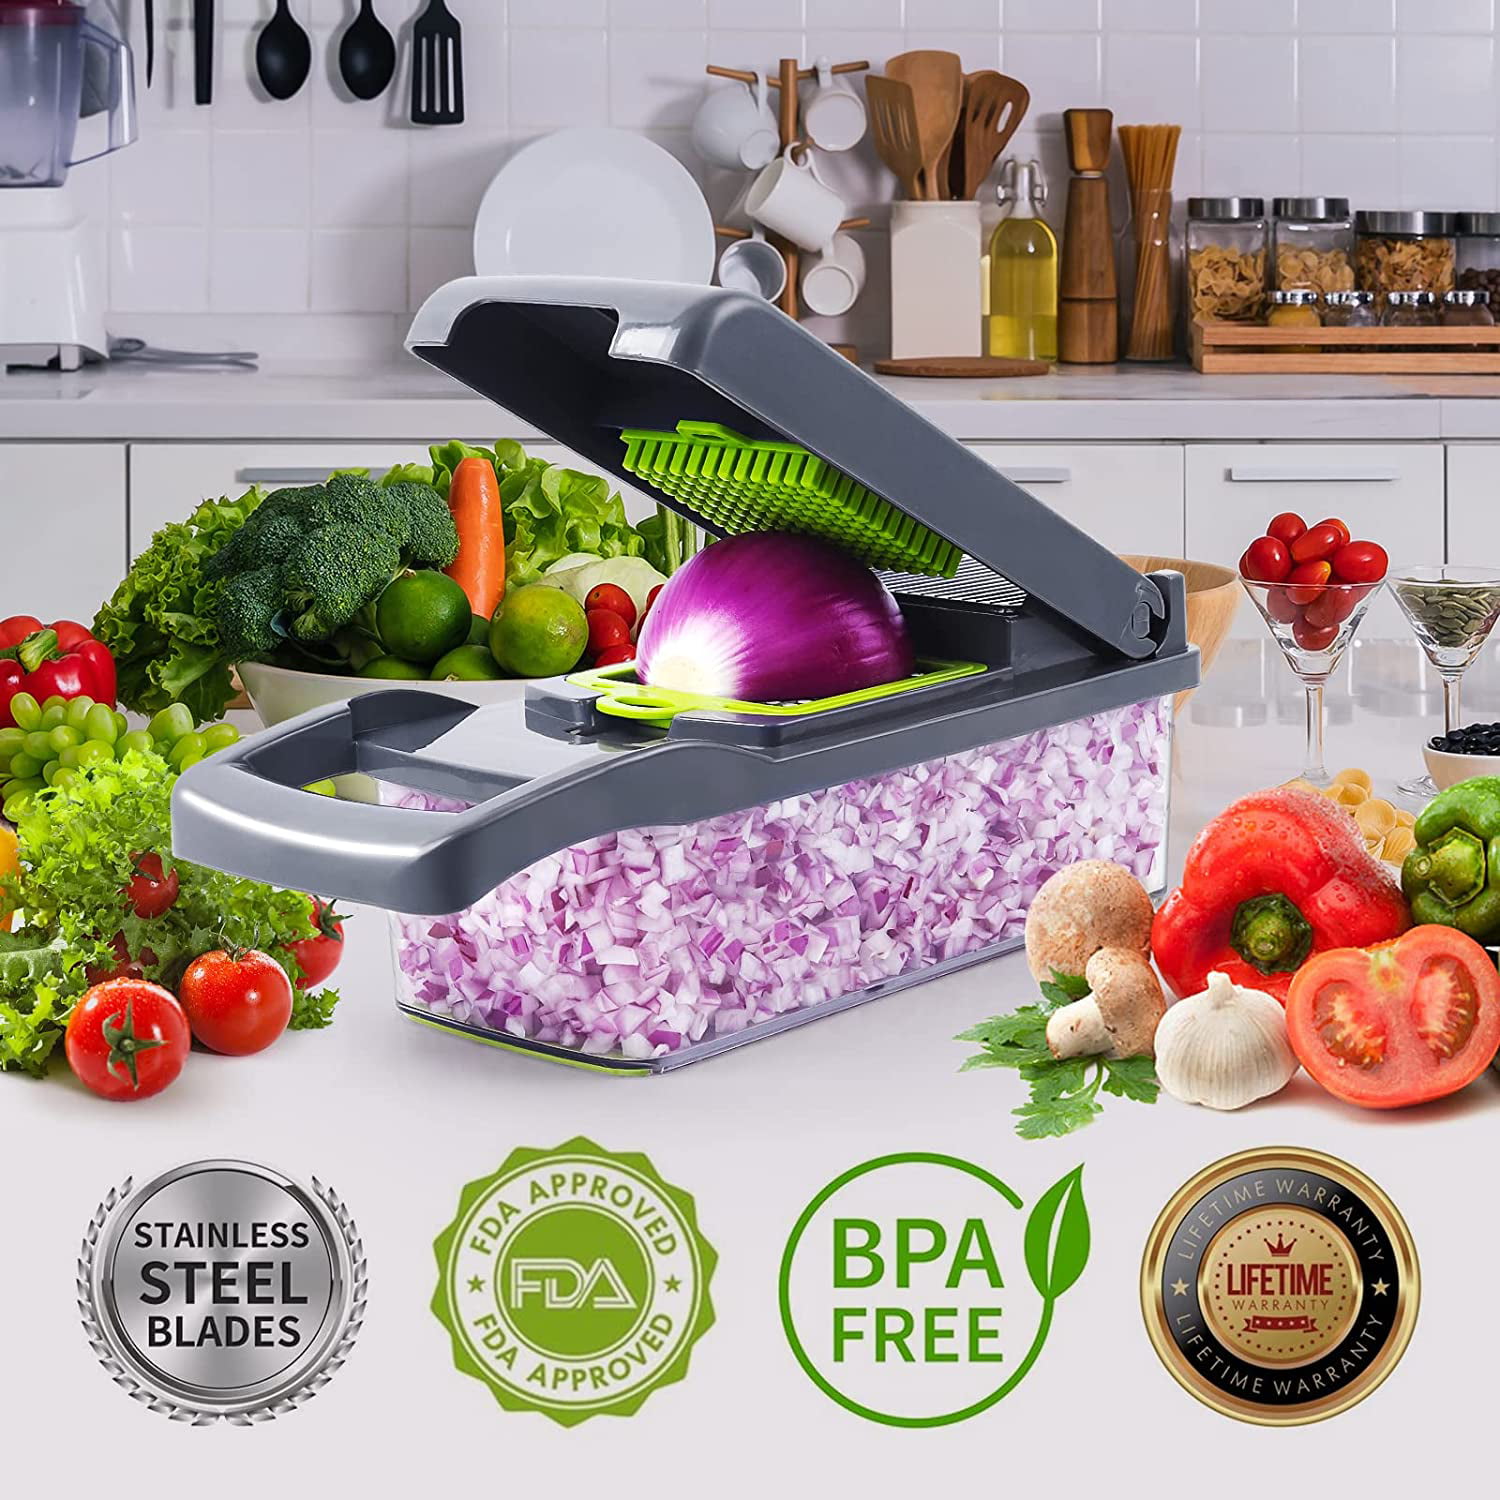 Vegetable Chopper,Prouneed Multifunctional 13-in-1 Food Choppers Onion Chopper  Vegetable Slicer Cutter Dicer Veggie chopper with 8 Blades,Colander  Basket,Container for Salad Potato Carrot Garlic 